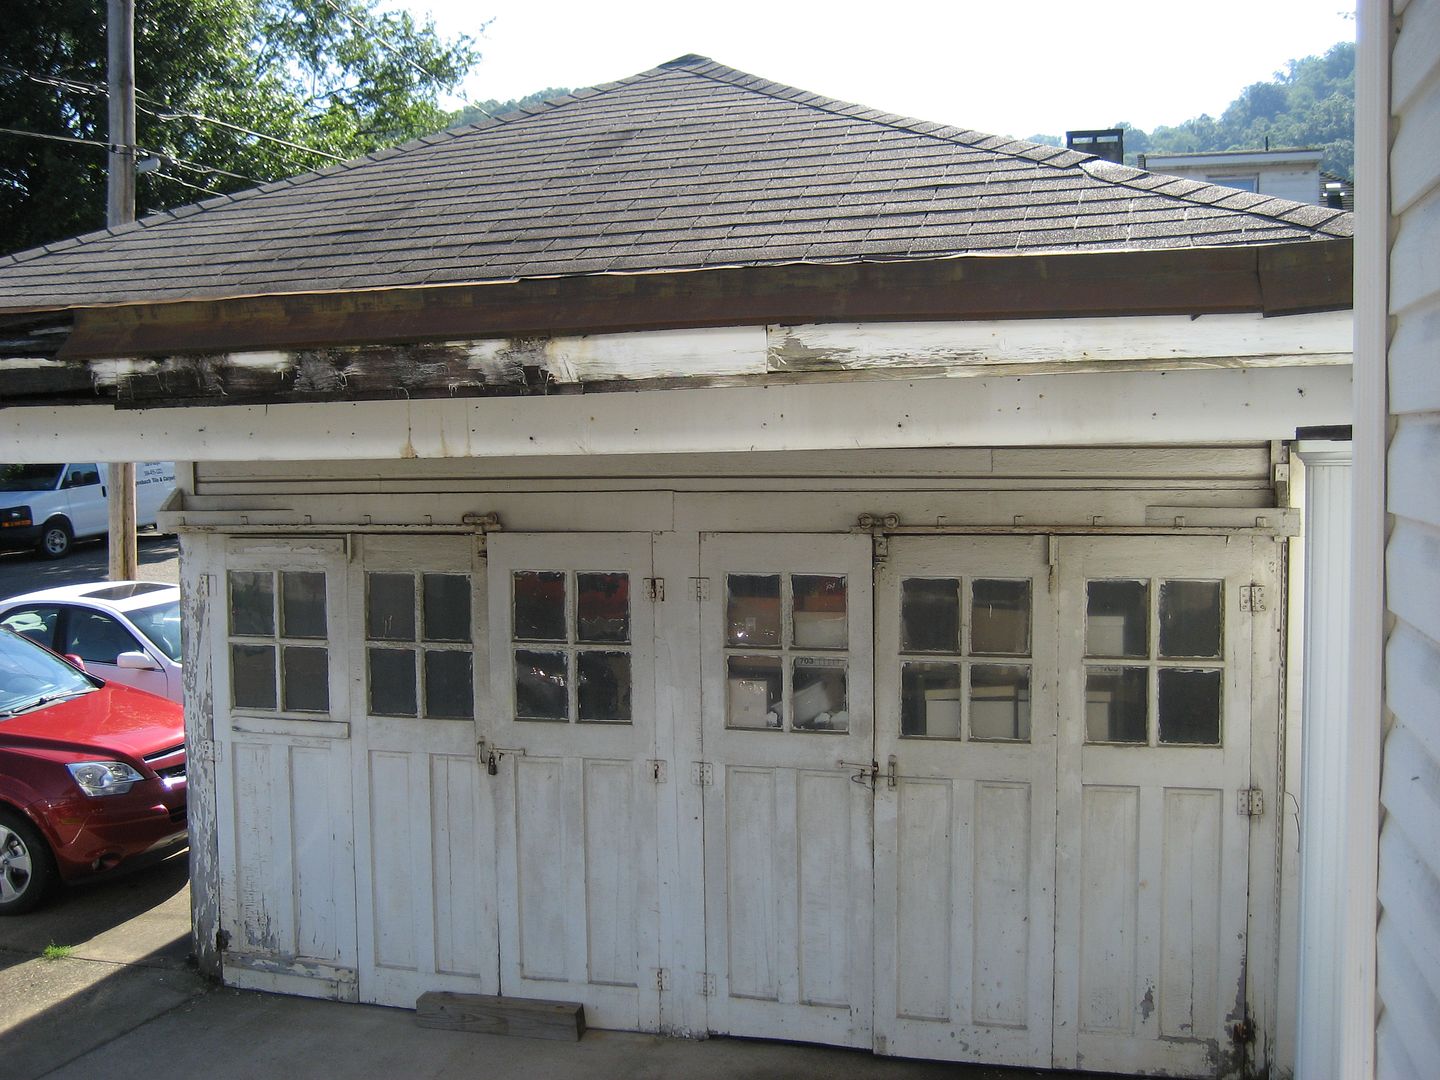 The garage is a darn fine match. The front extends well past the garage shown in the catalog image, but that could have been altered easily enough when built, or in the intervening 90 years. 